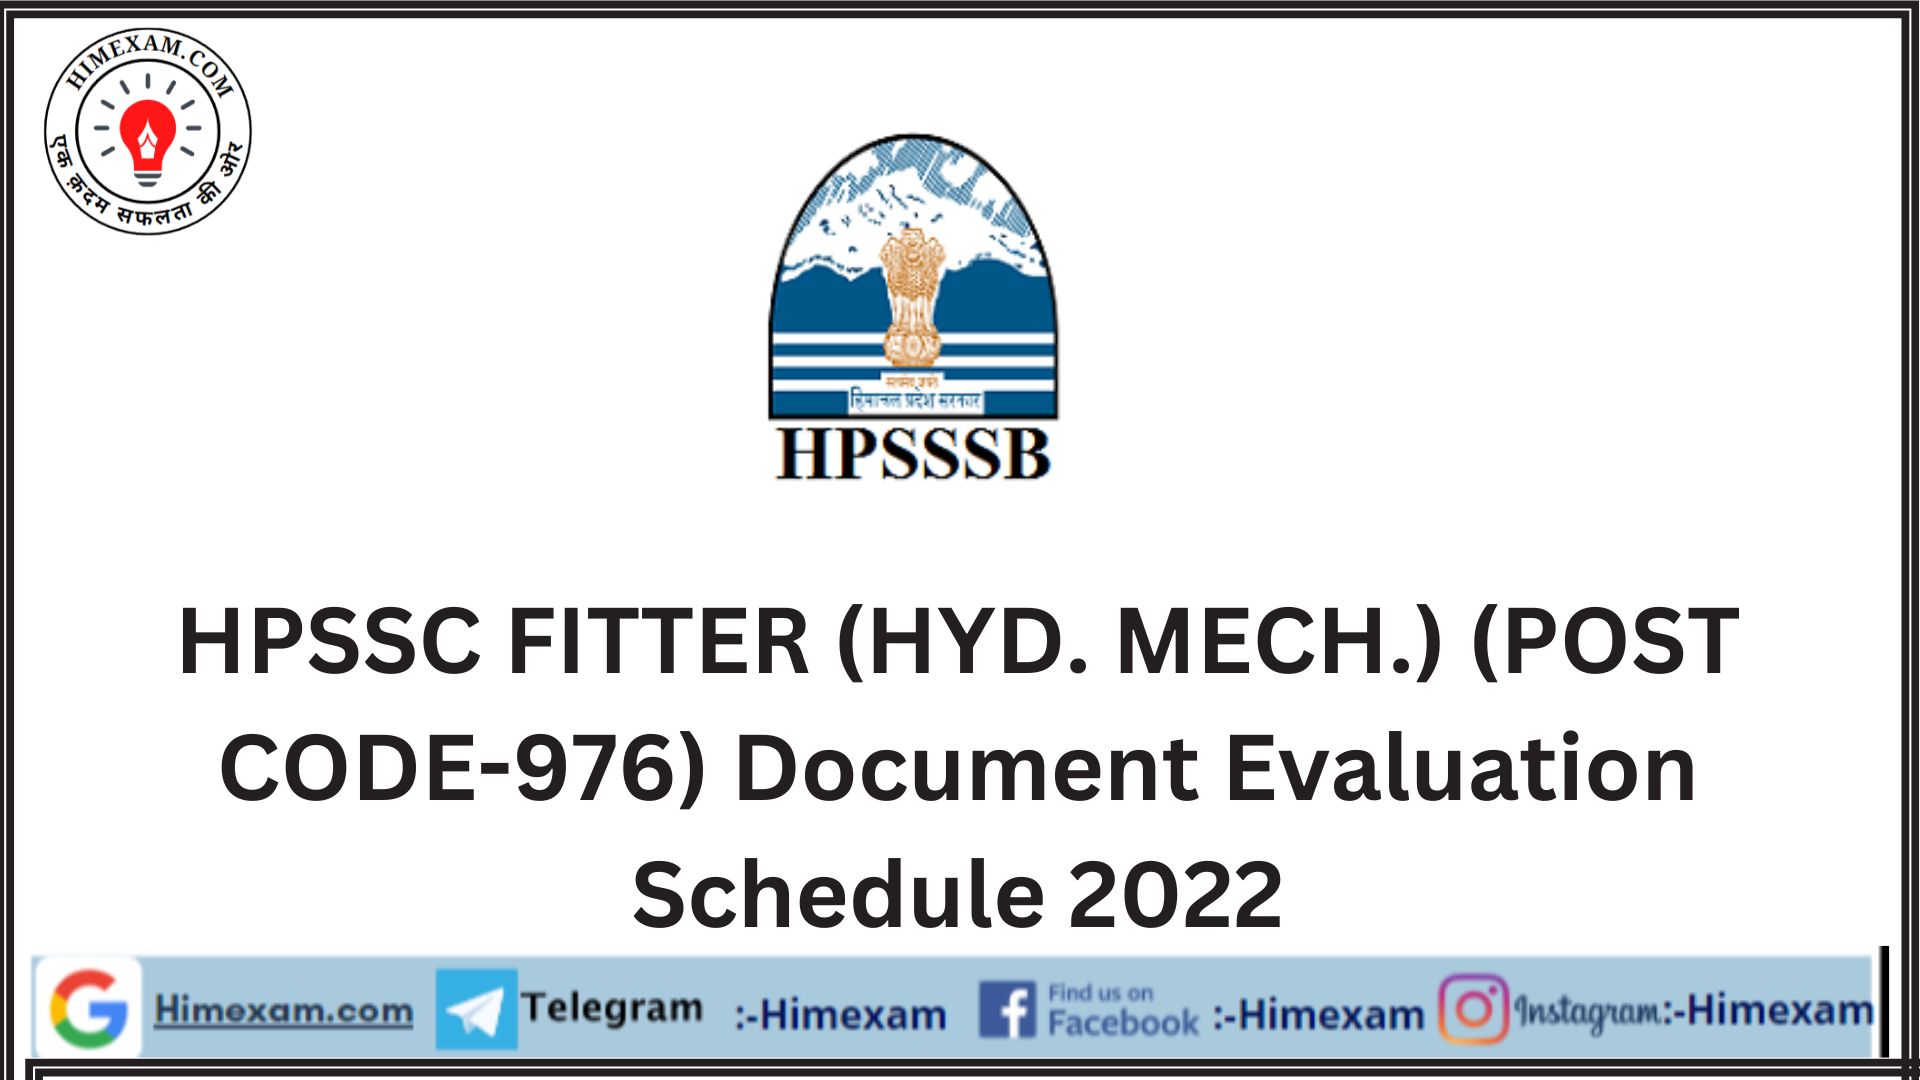 HPSSC FITTER (HYD. MECH.) (POST CODE-976) Document Evaluation Schedule 2022